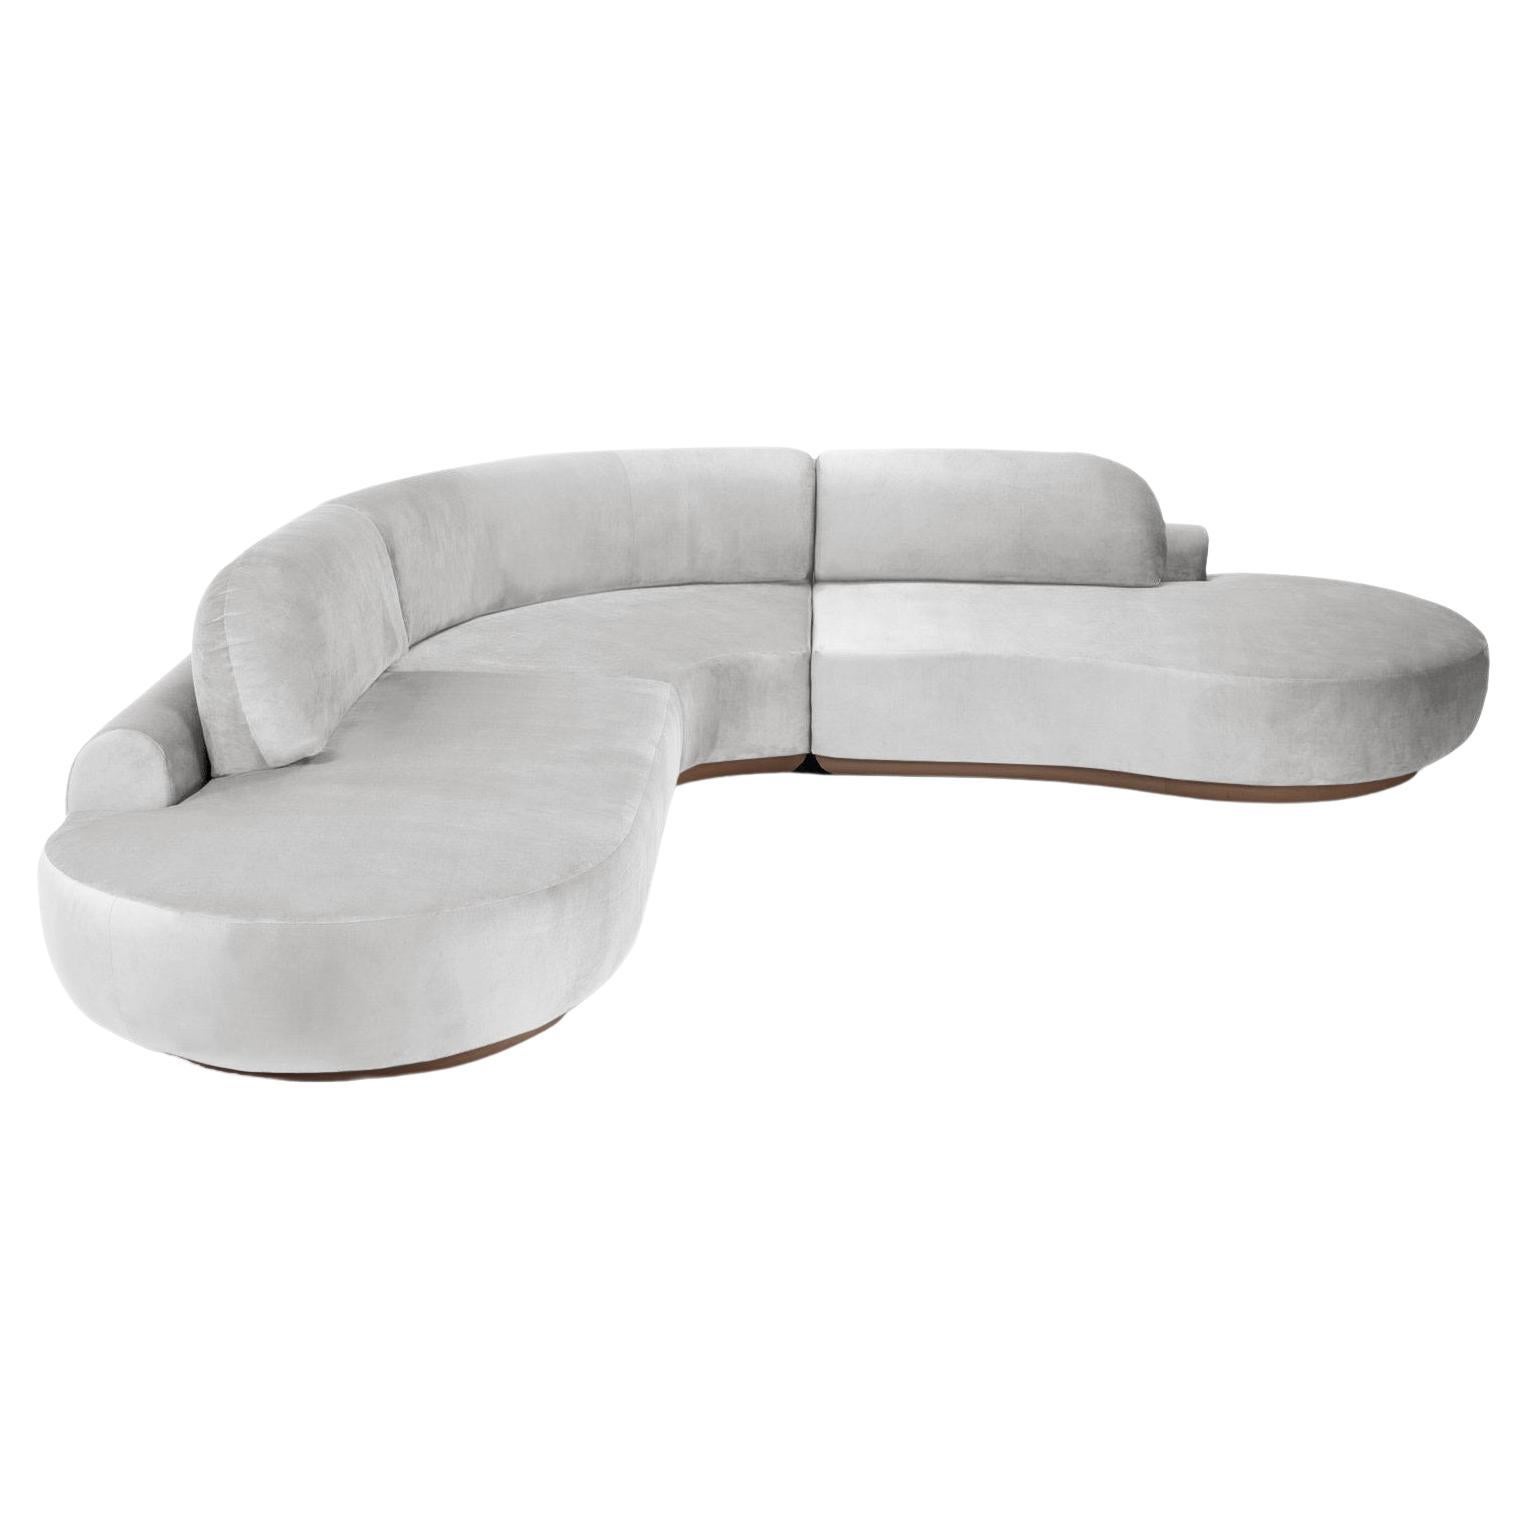 Naked Curved Sectional Sofa, 3 Piece with Beech Ash-056-1 and Aluminium For Sale